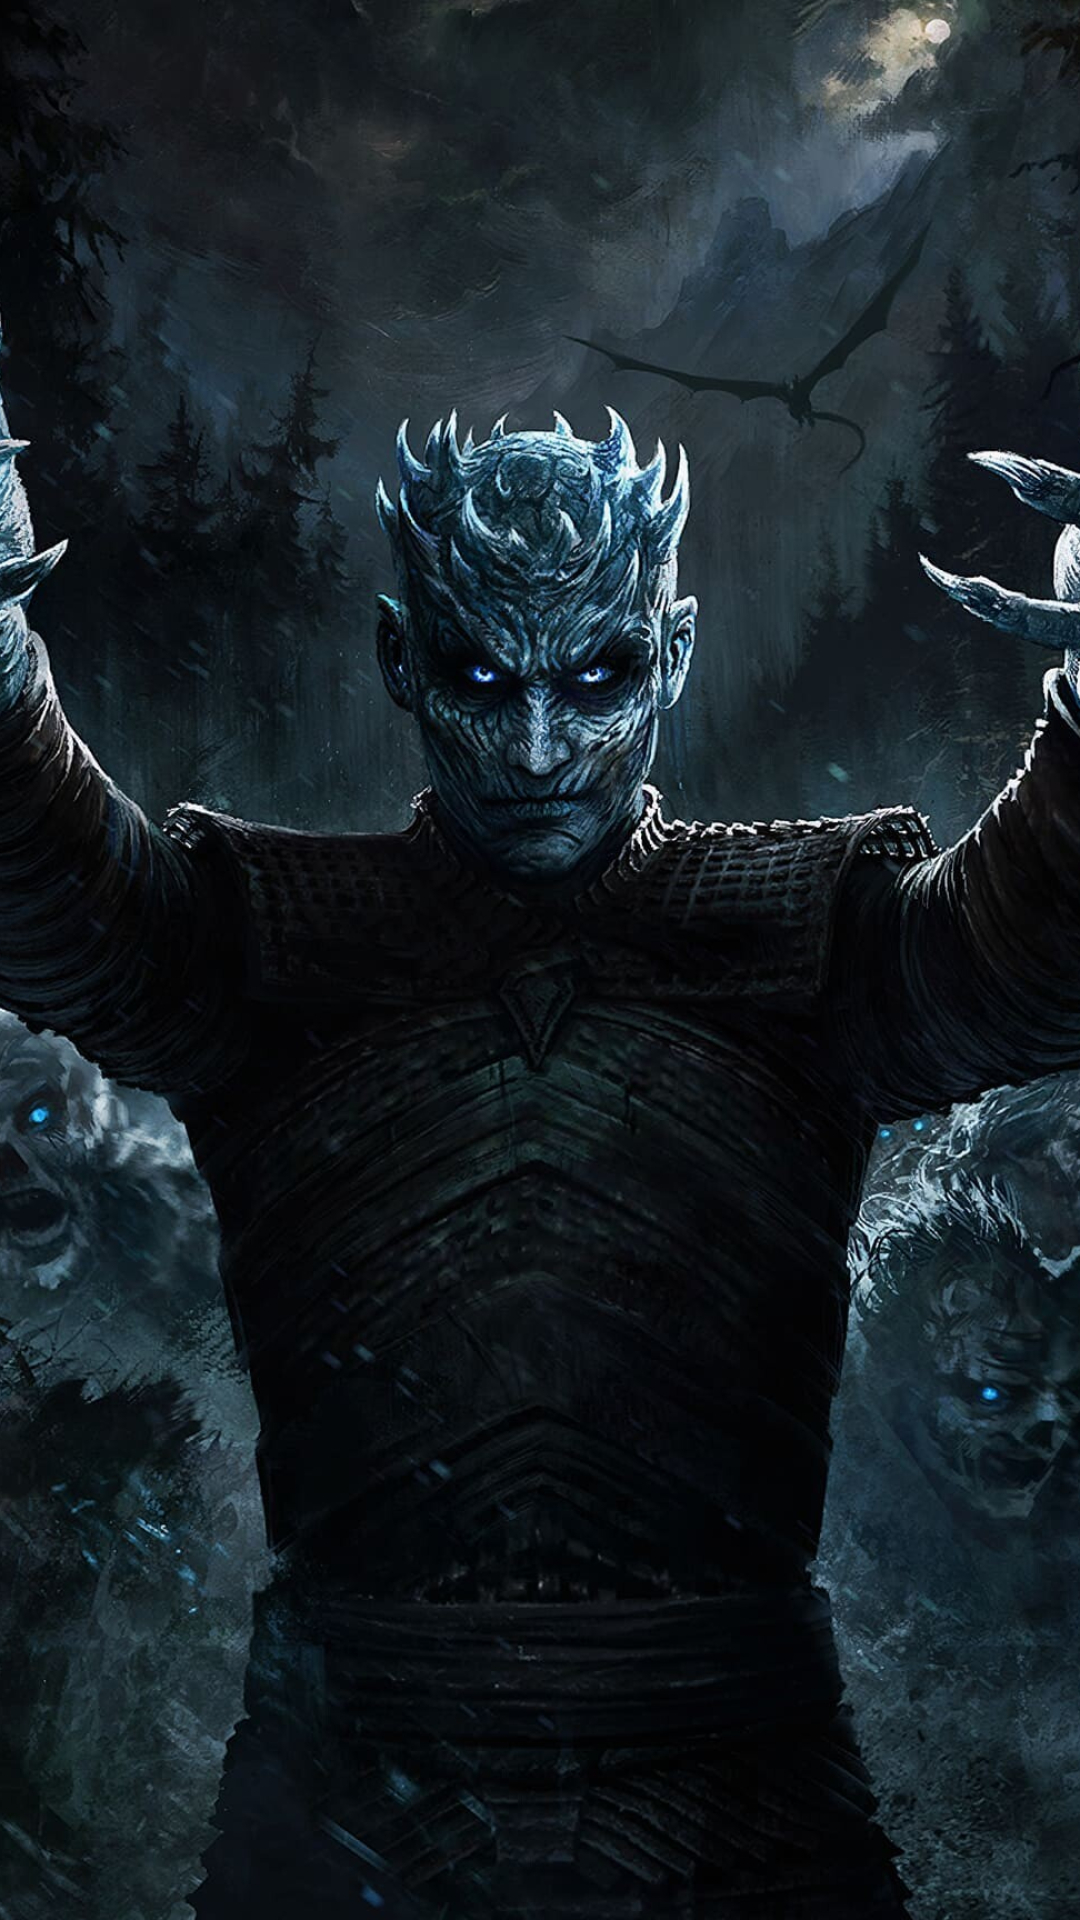 Game of Thrones: Night King, the leader and first of the White Walkers. 1080x1920 Full HD Background.